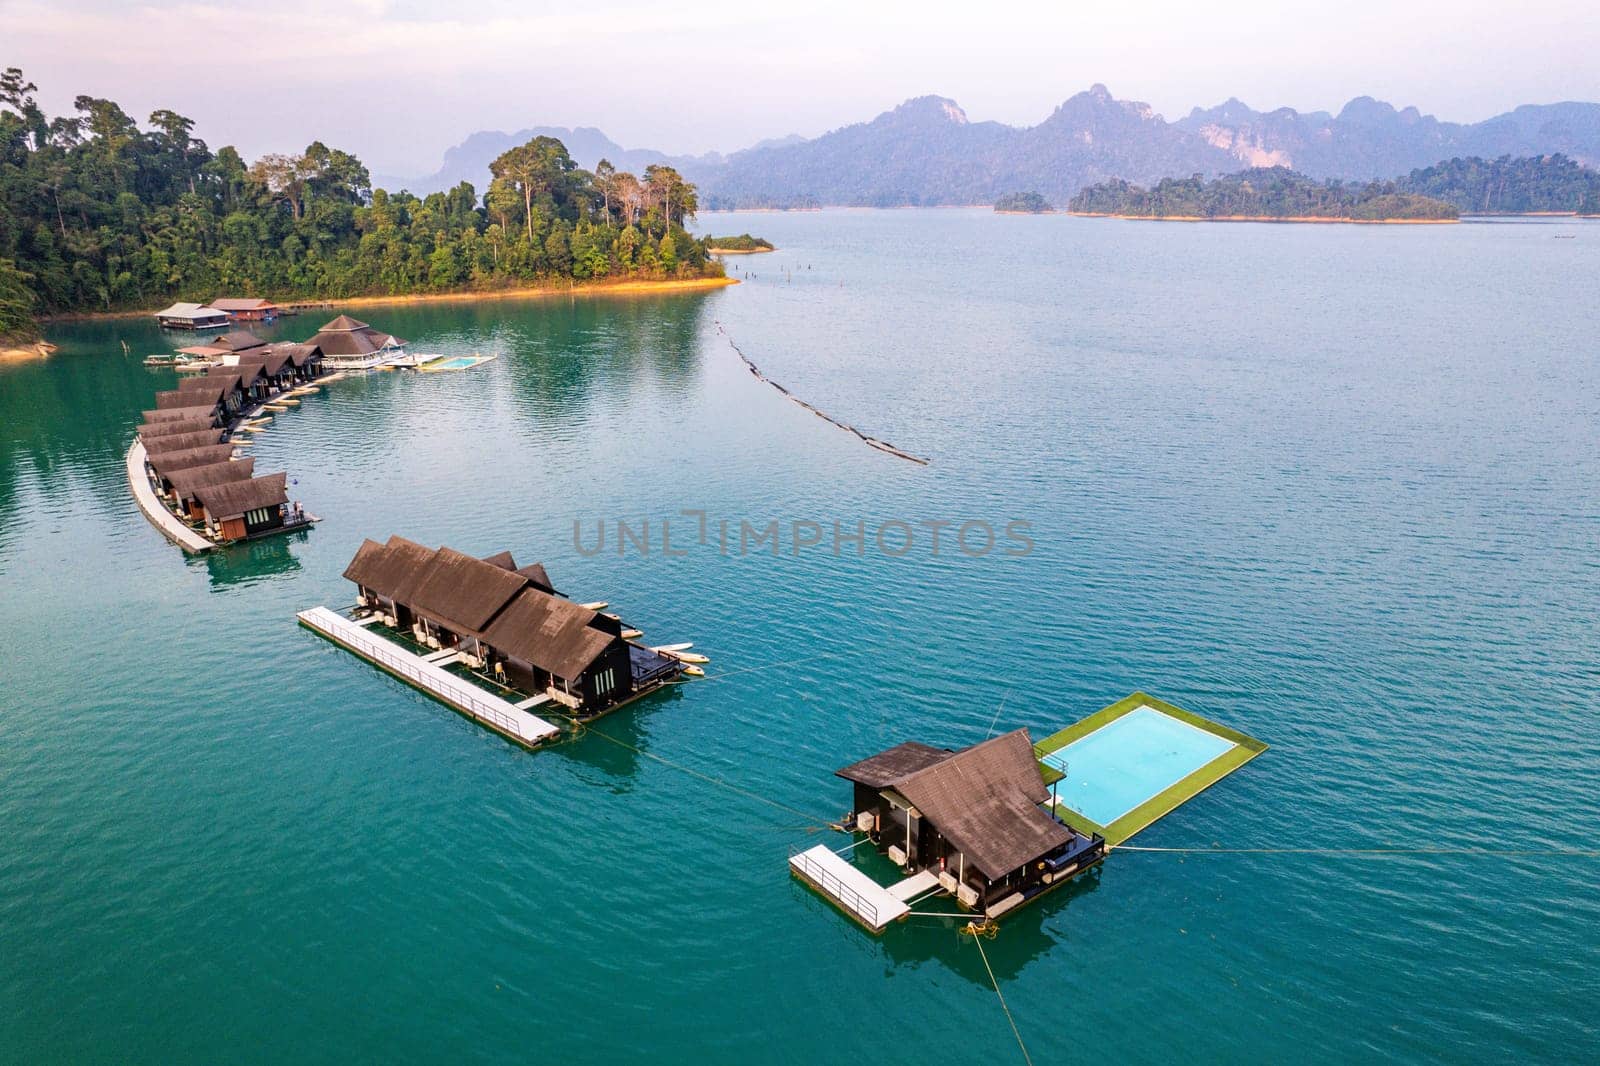 Aerial view of Khao Sok national park at sunrise, in Cheow lan lake, Surat Thani, Thailand by worldpitou